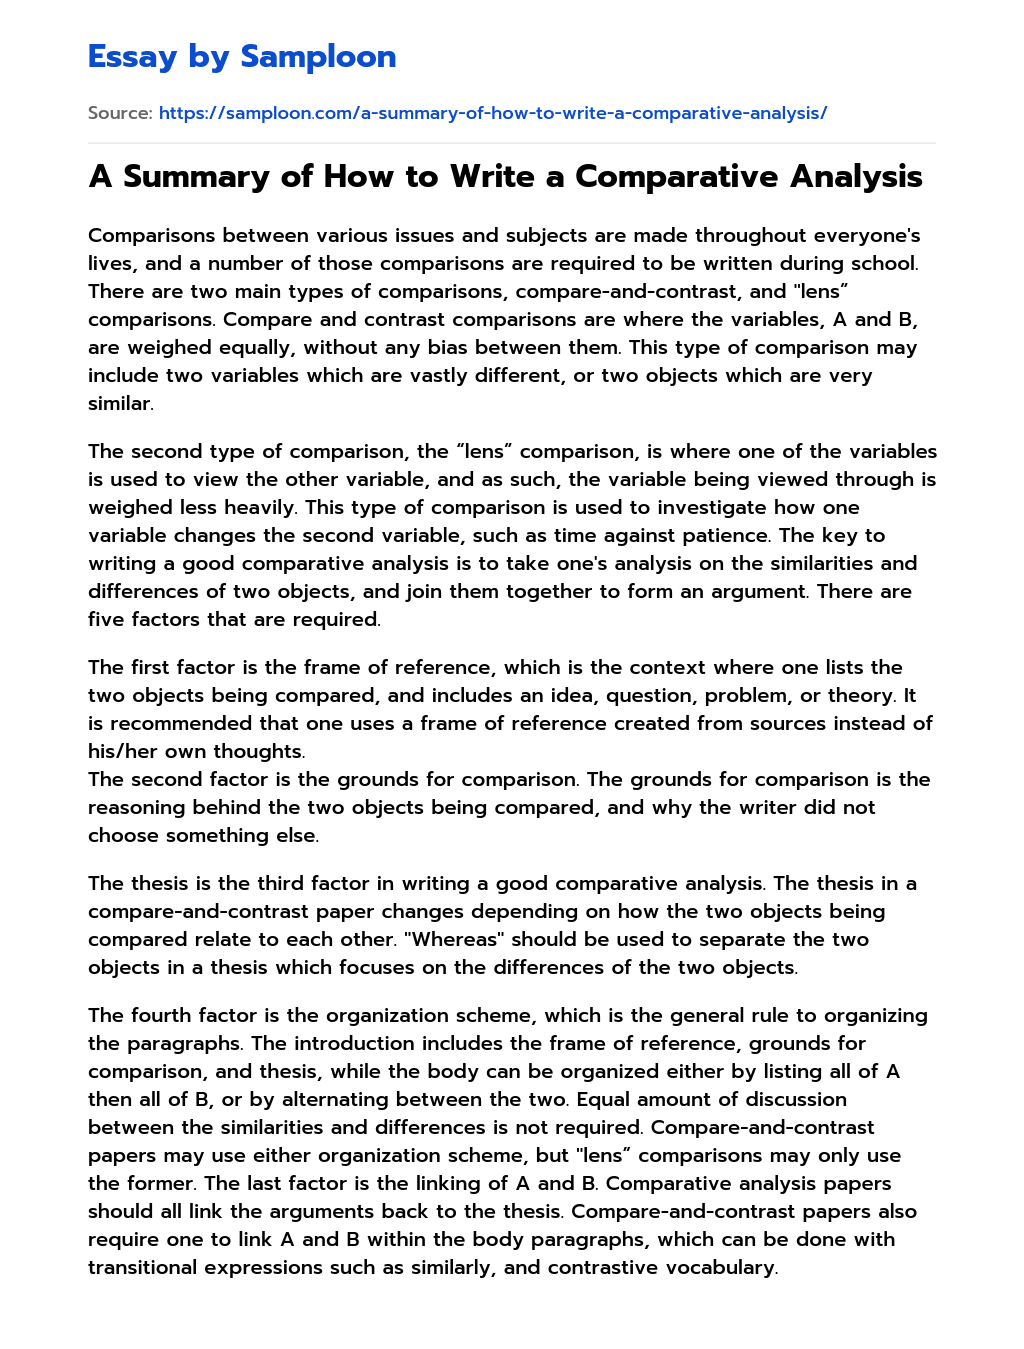 A Summary of How to Write a Comparative Analysis essay